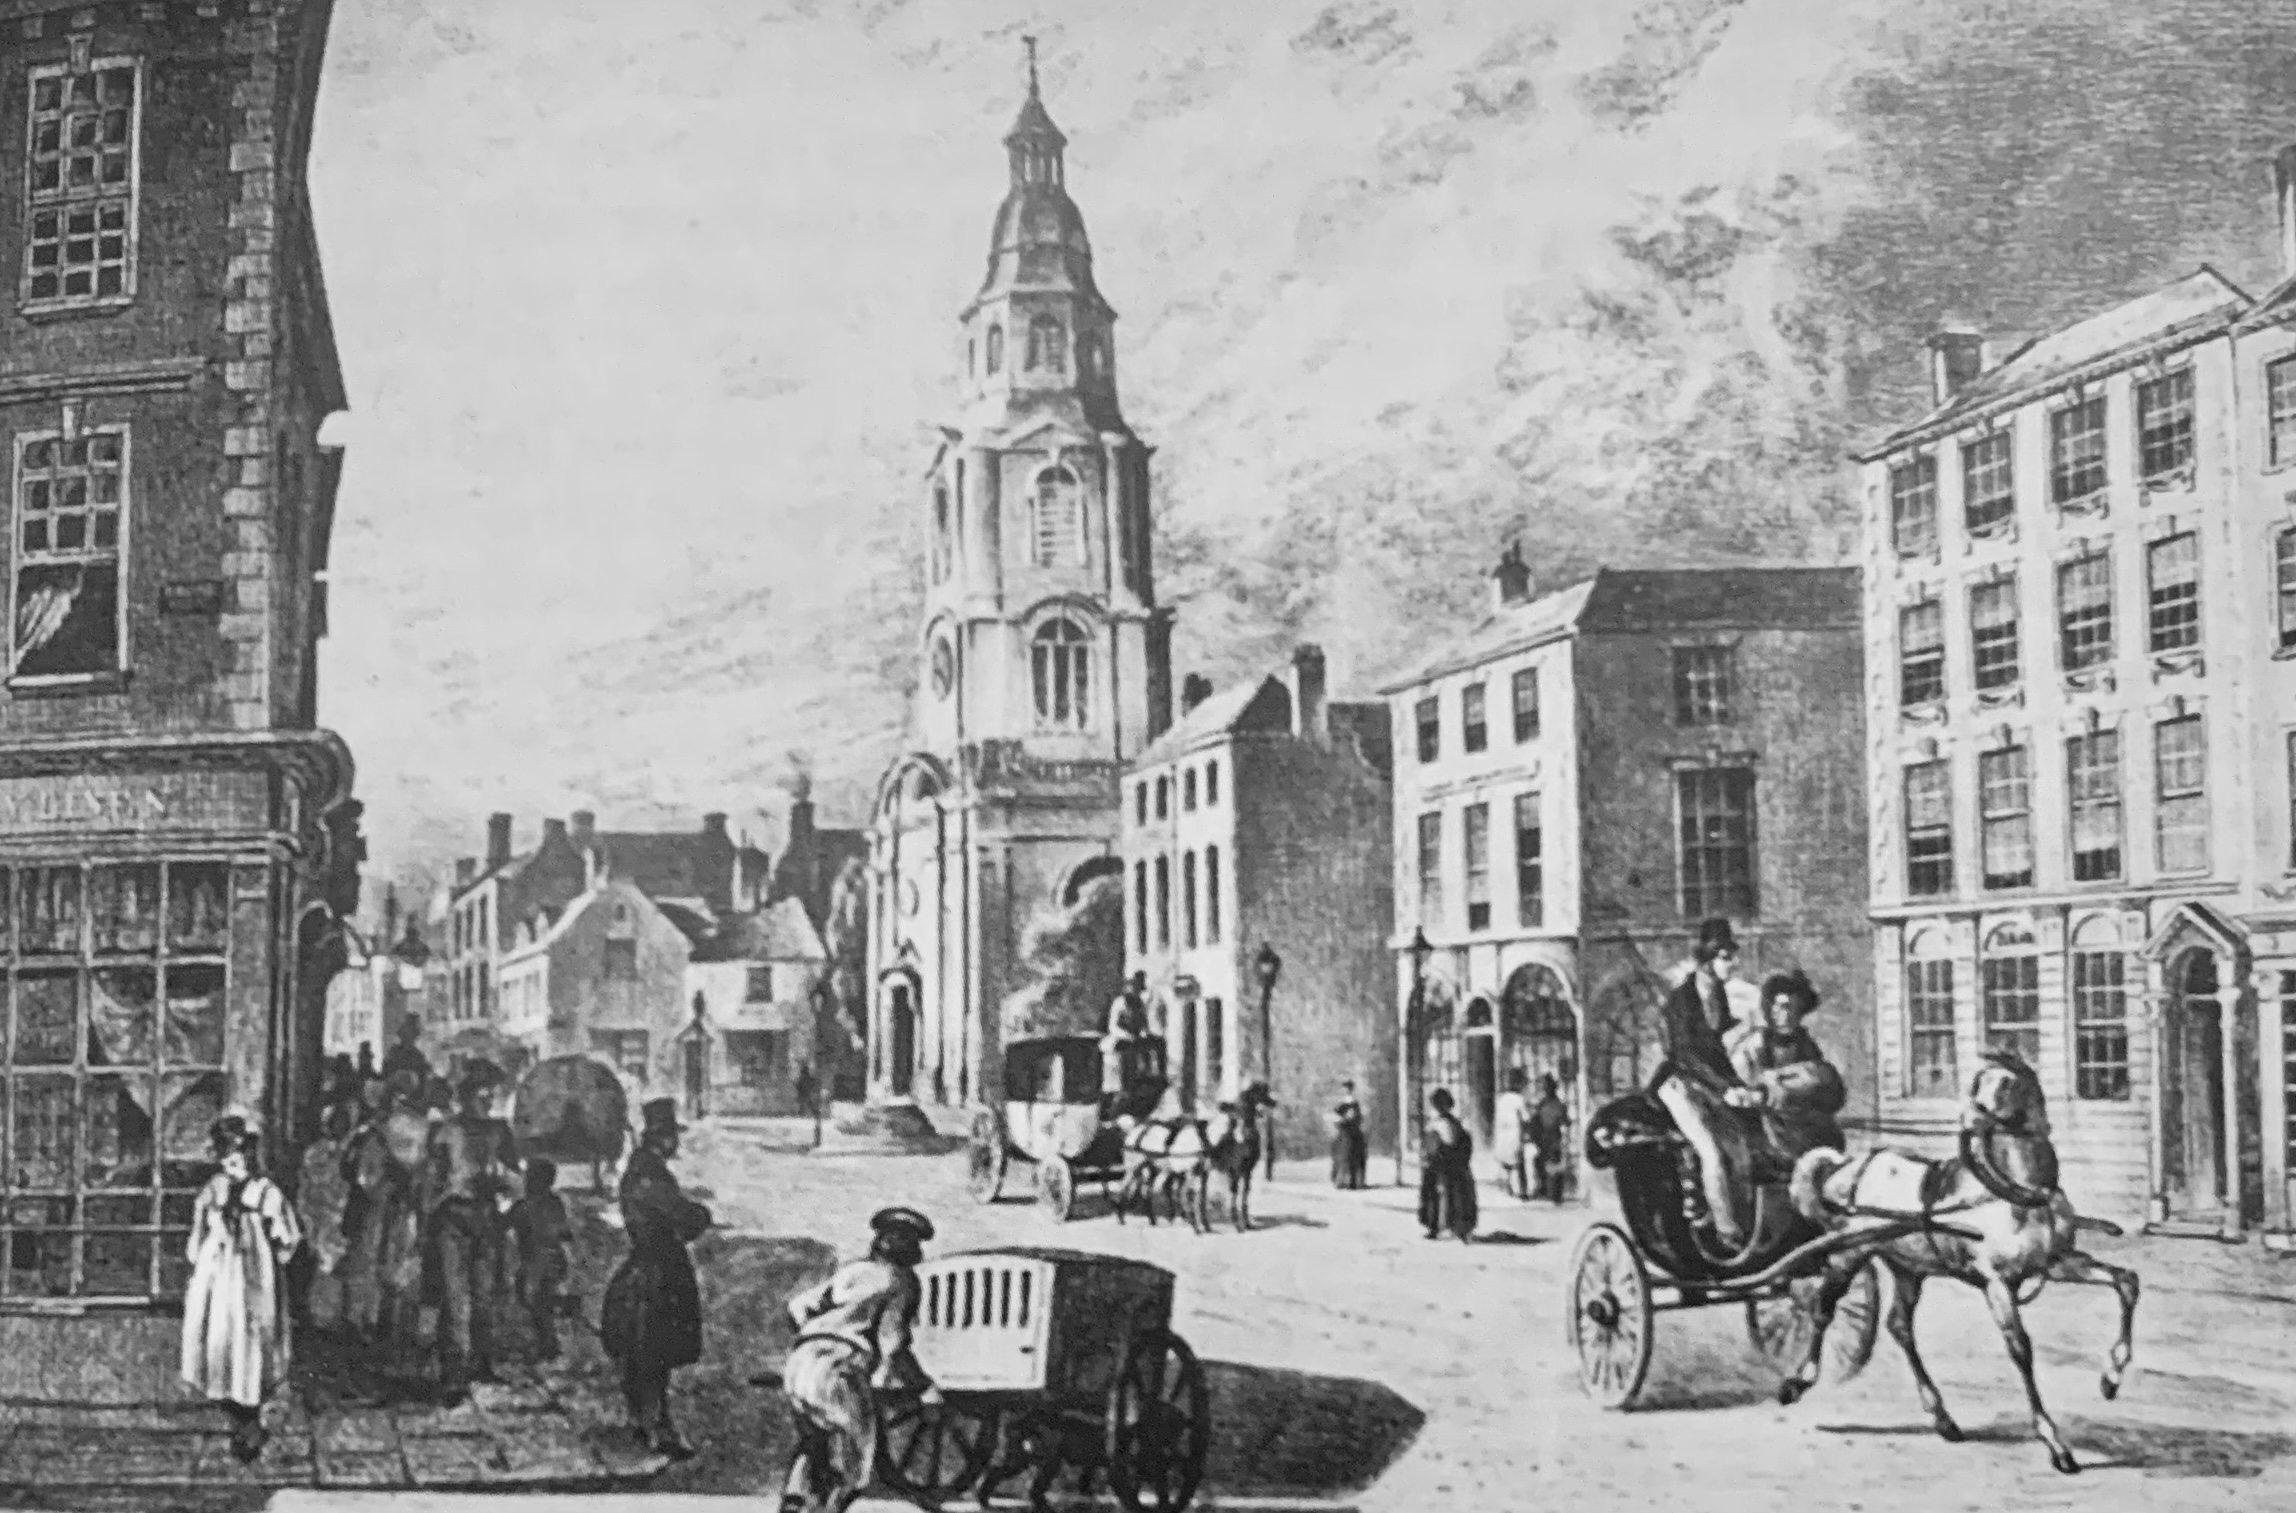 Foregate Street in the 1800s